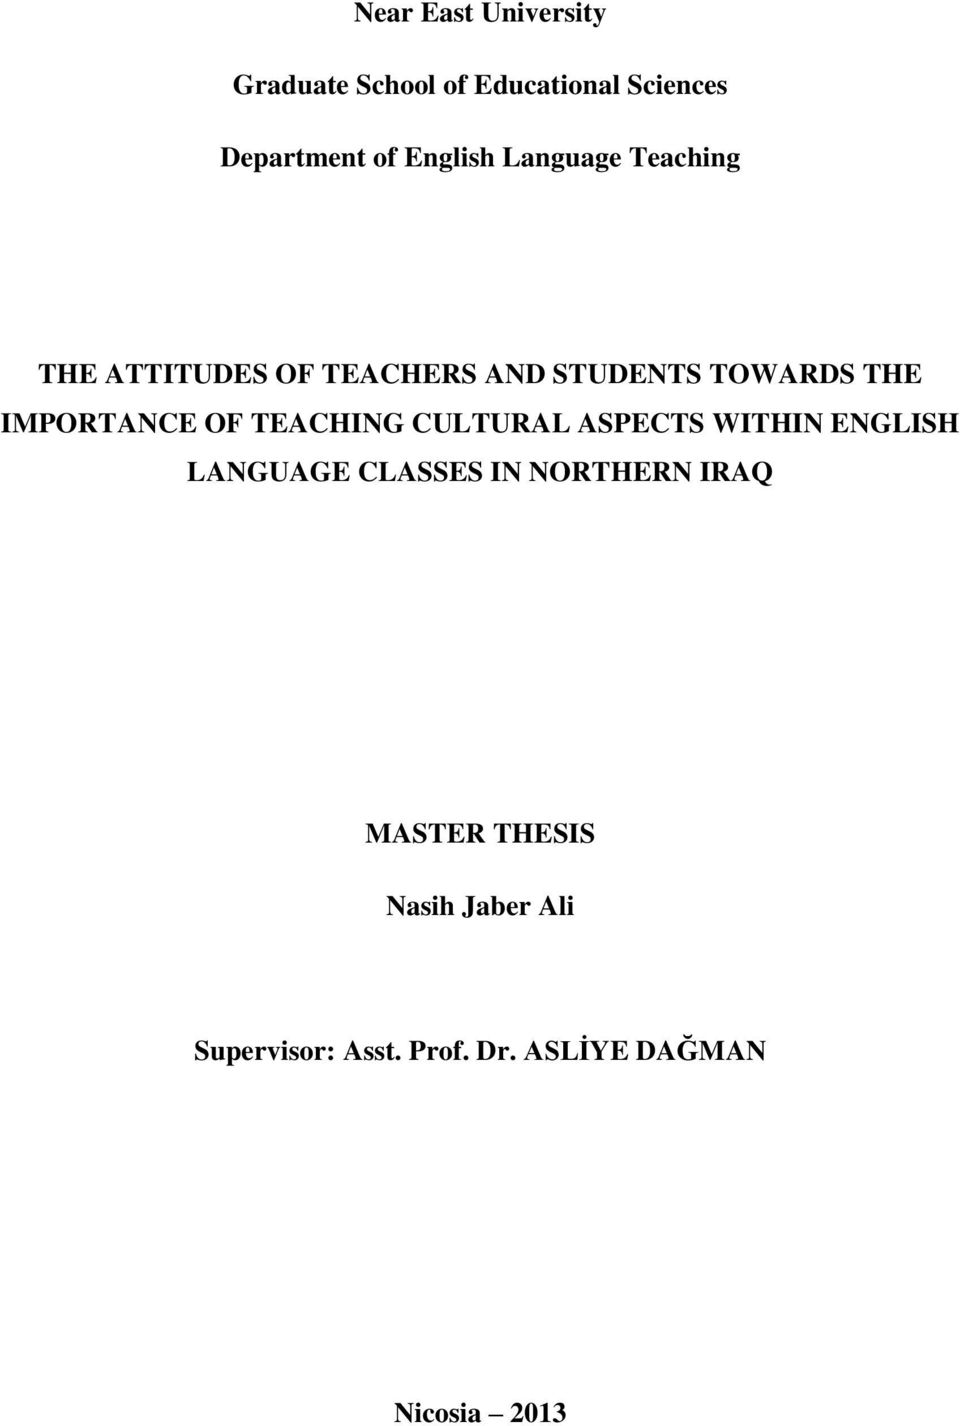 IMPORTANCE OF TEACHING CULTURAL ASPECTS WITHIN ENGLISH LANGUAGE CLASSES IN